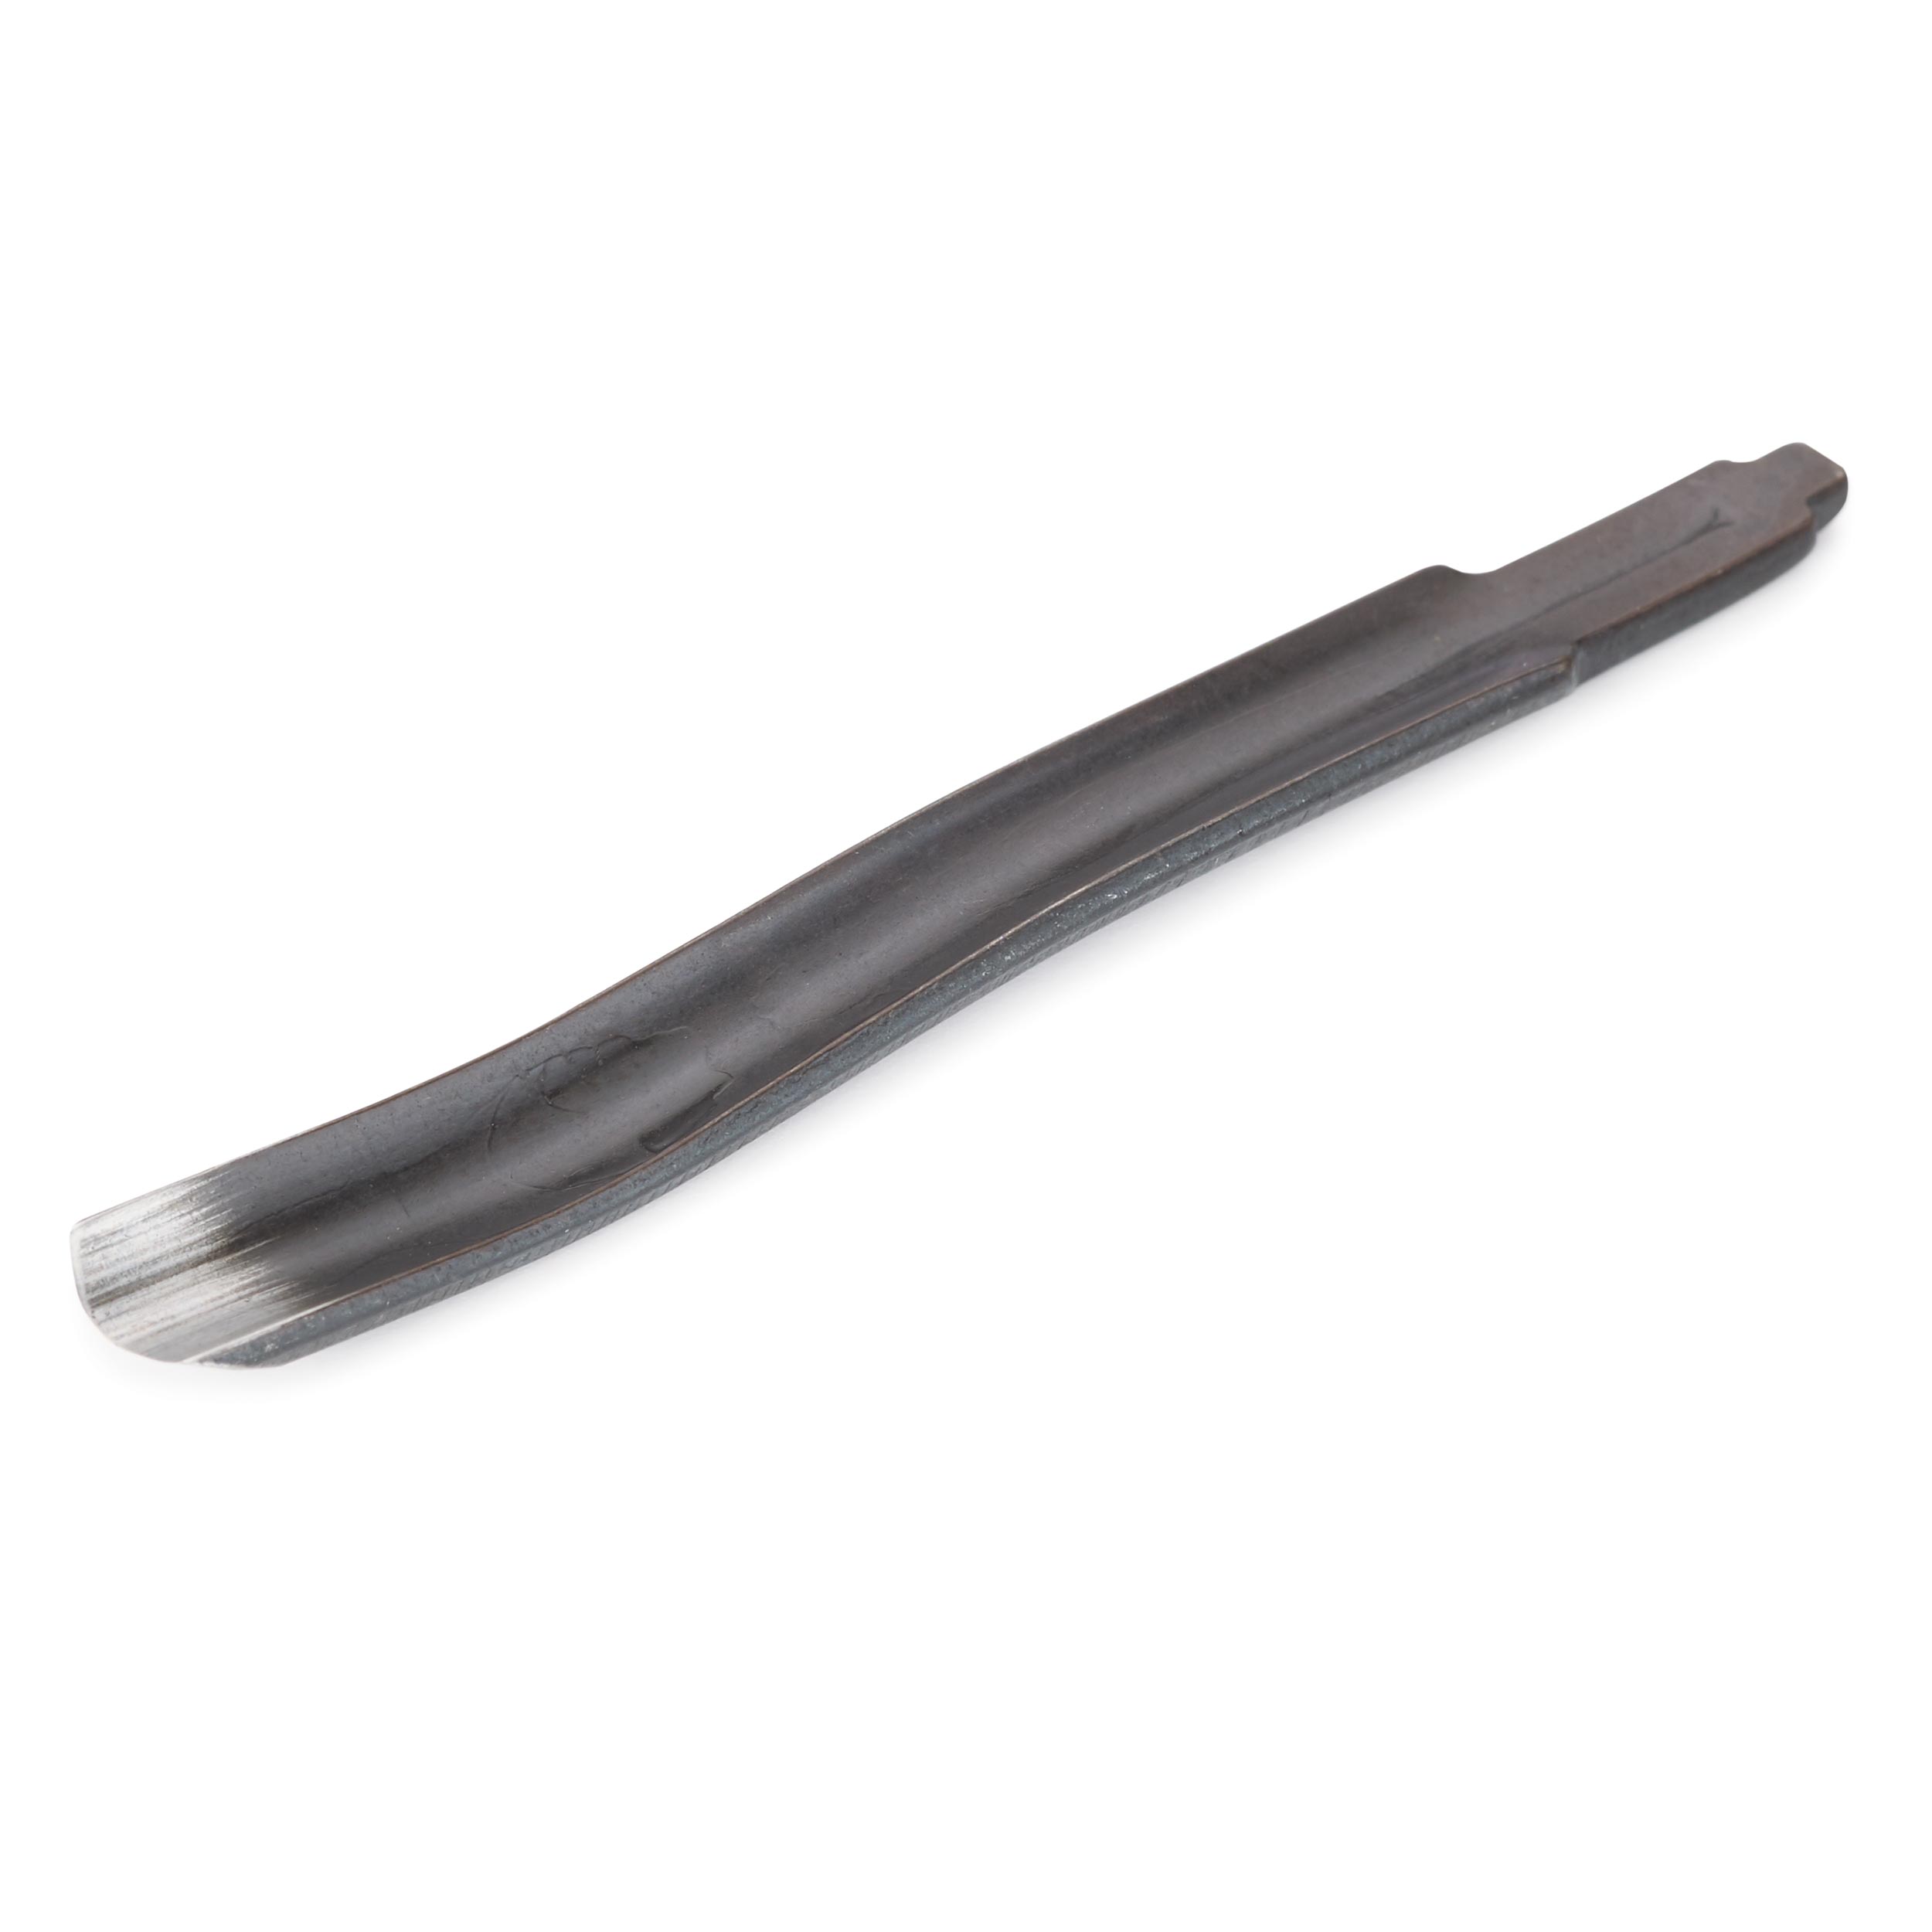 Longer Type Round Curve 6mm Blade Hct & Wcs-kh4